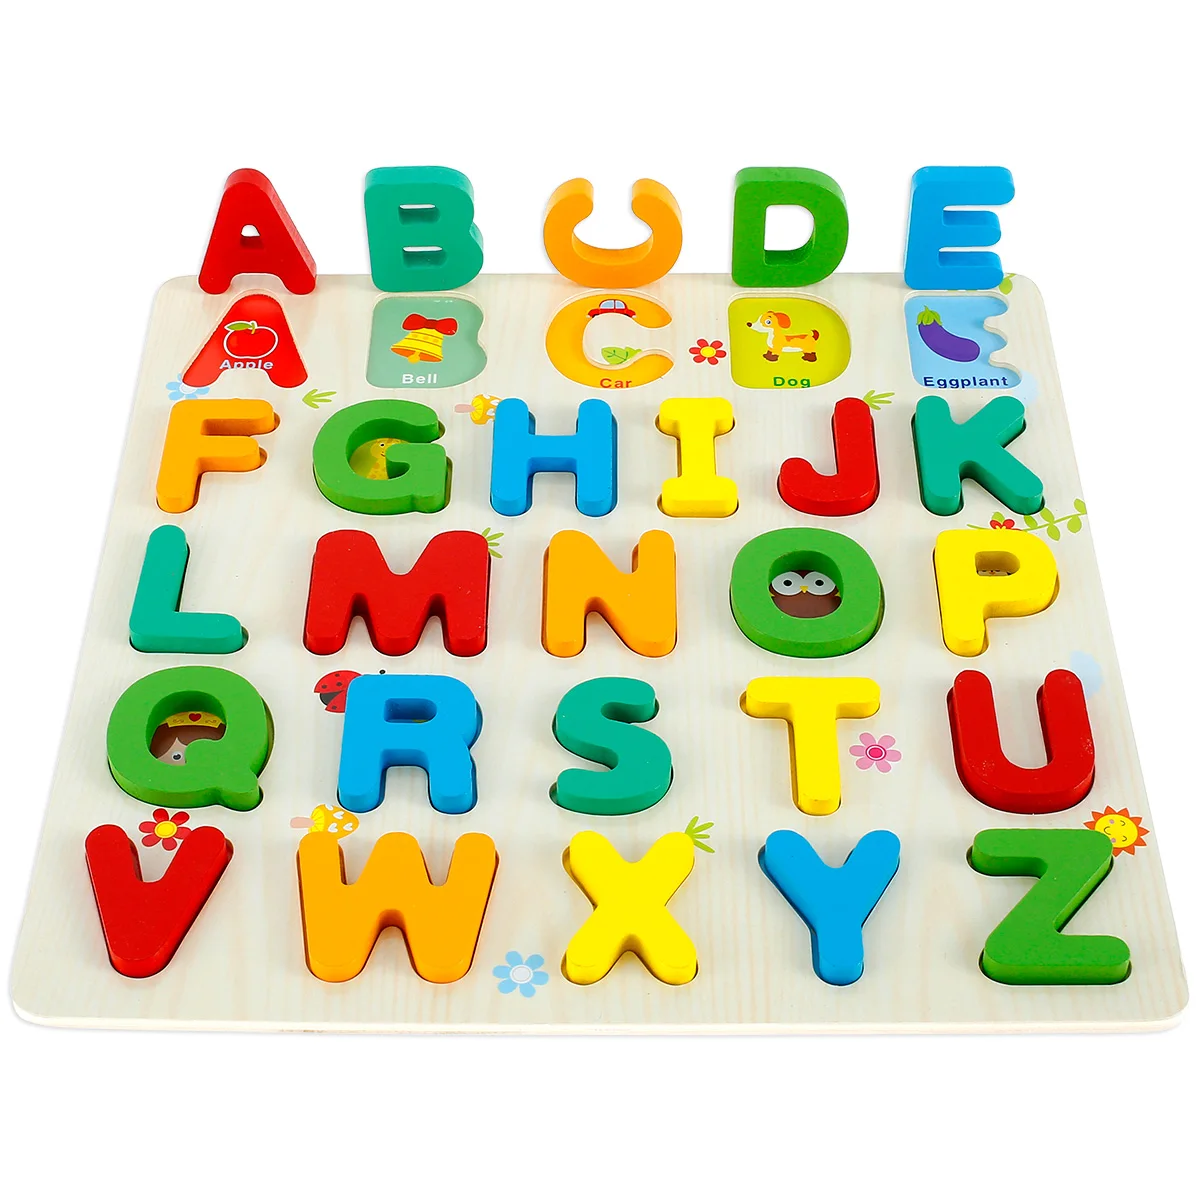 

Wooden Alphabet Puzzle ABC Numbers Shapes Puzzles Boards Toys with Letter Blocks Early Educational Learning Toys Letters Jigsaw